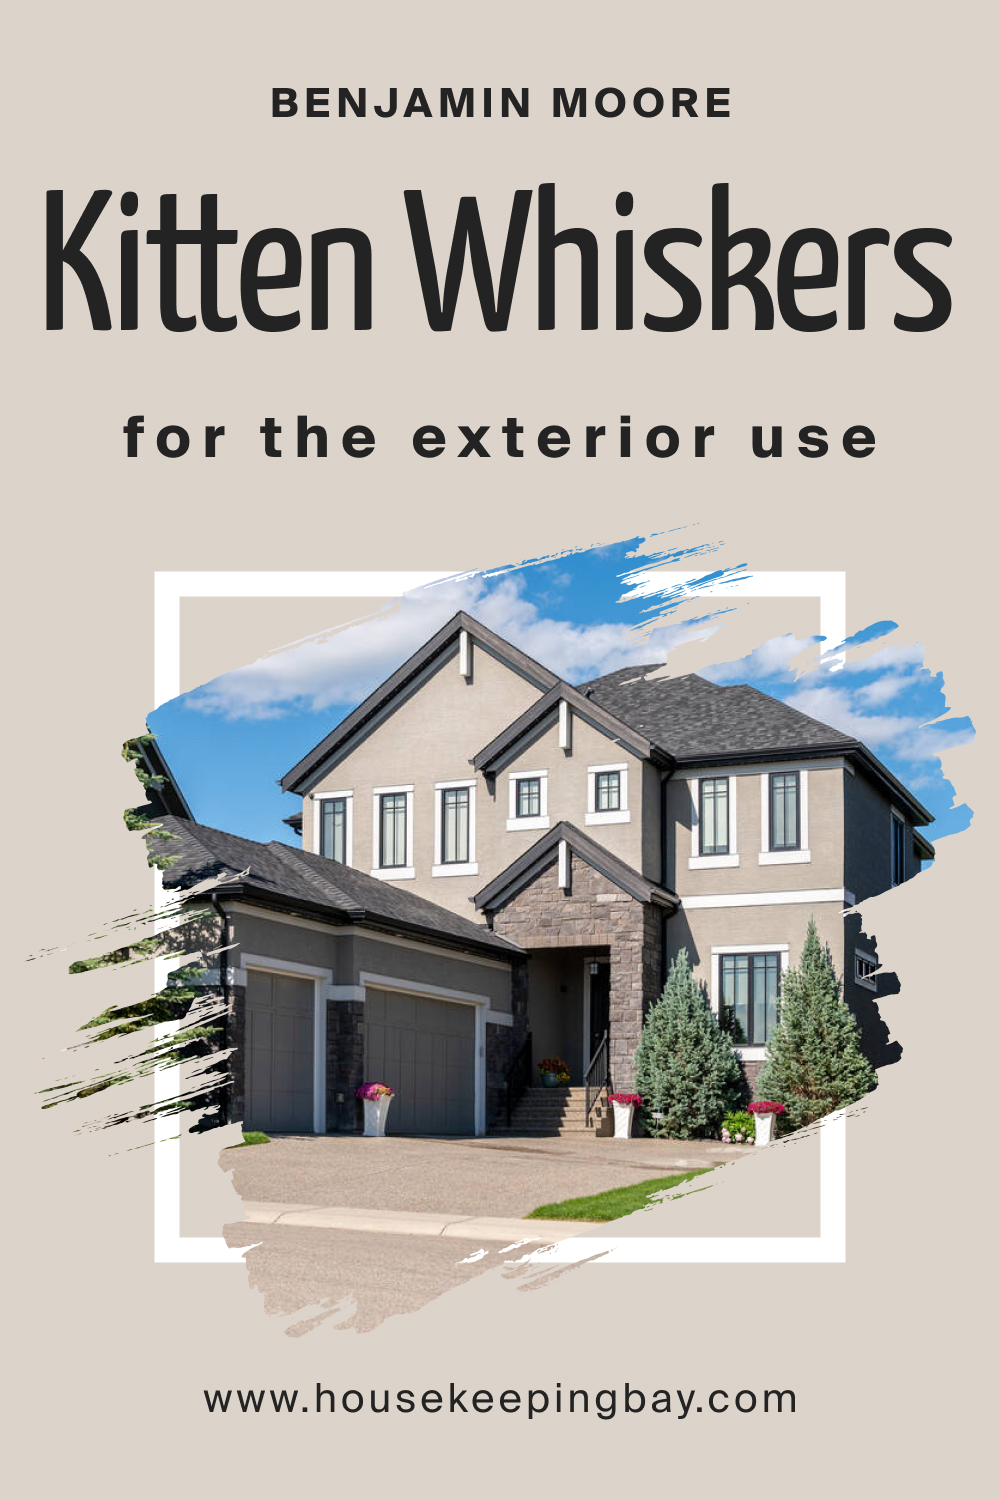 How to Use BM Kitten Whiskers 1003 for an Exterior?